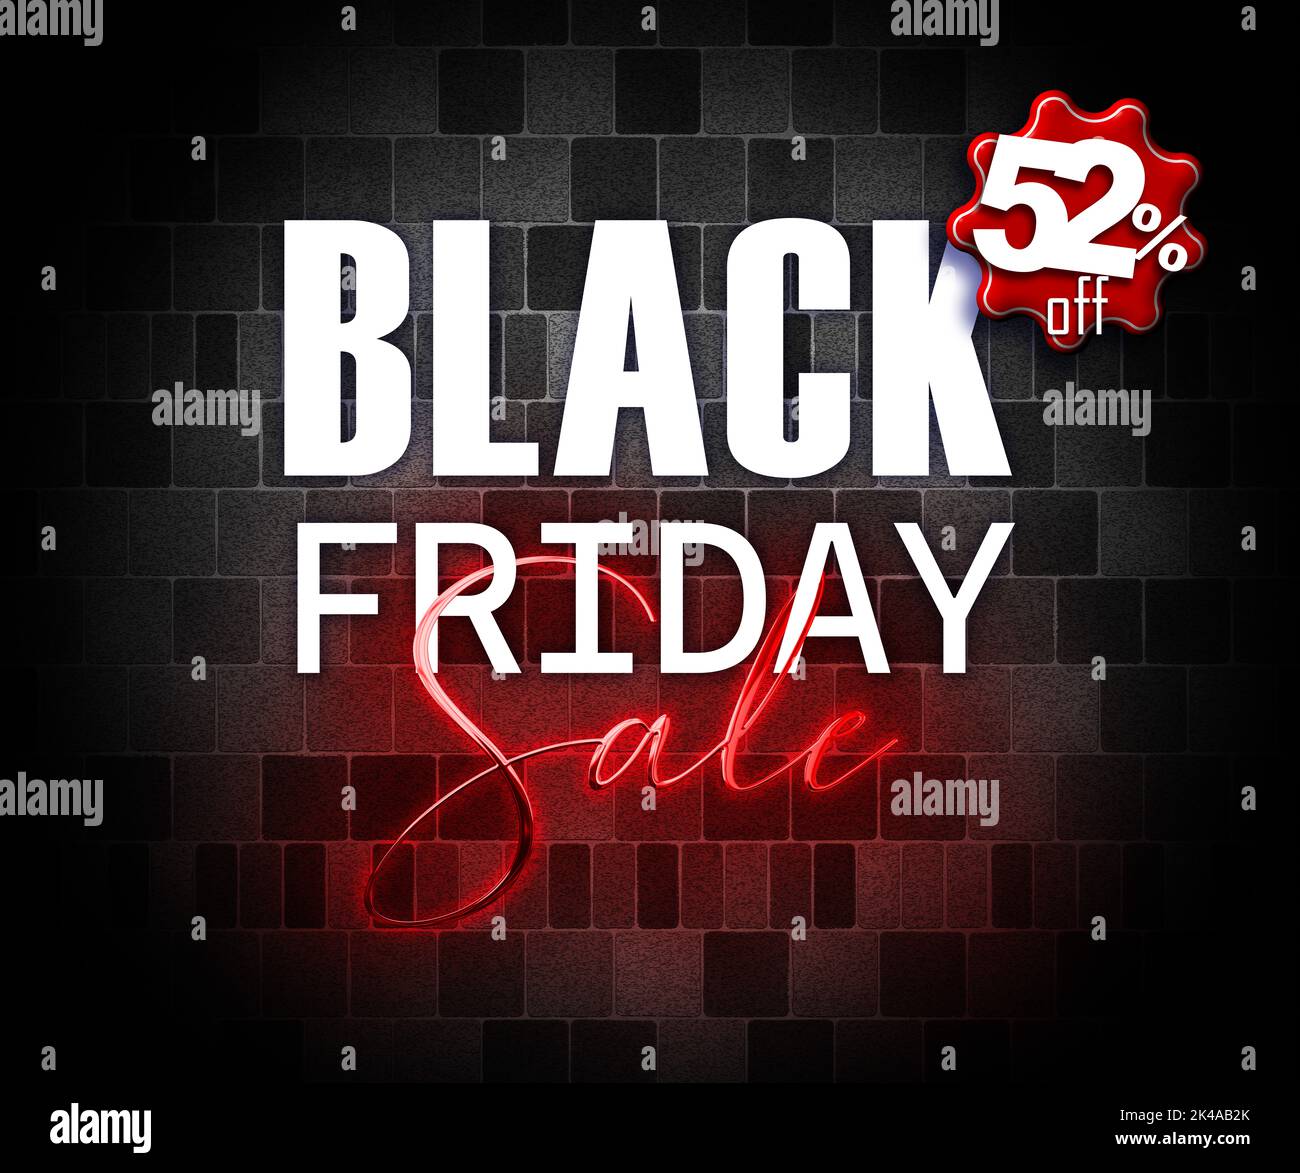 illustration with 3d elements black friday promotion banner 52 percent off sales increase Stock Photo